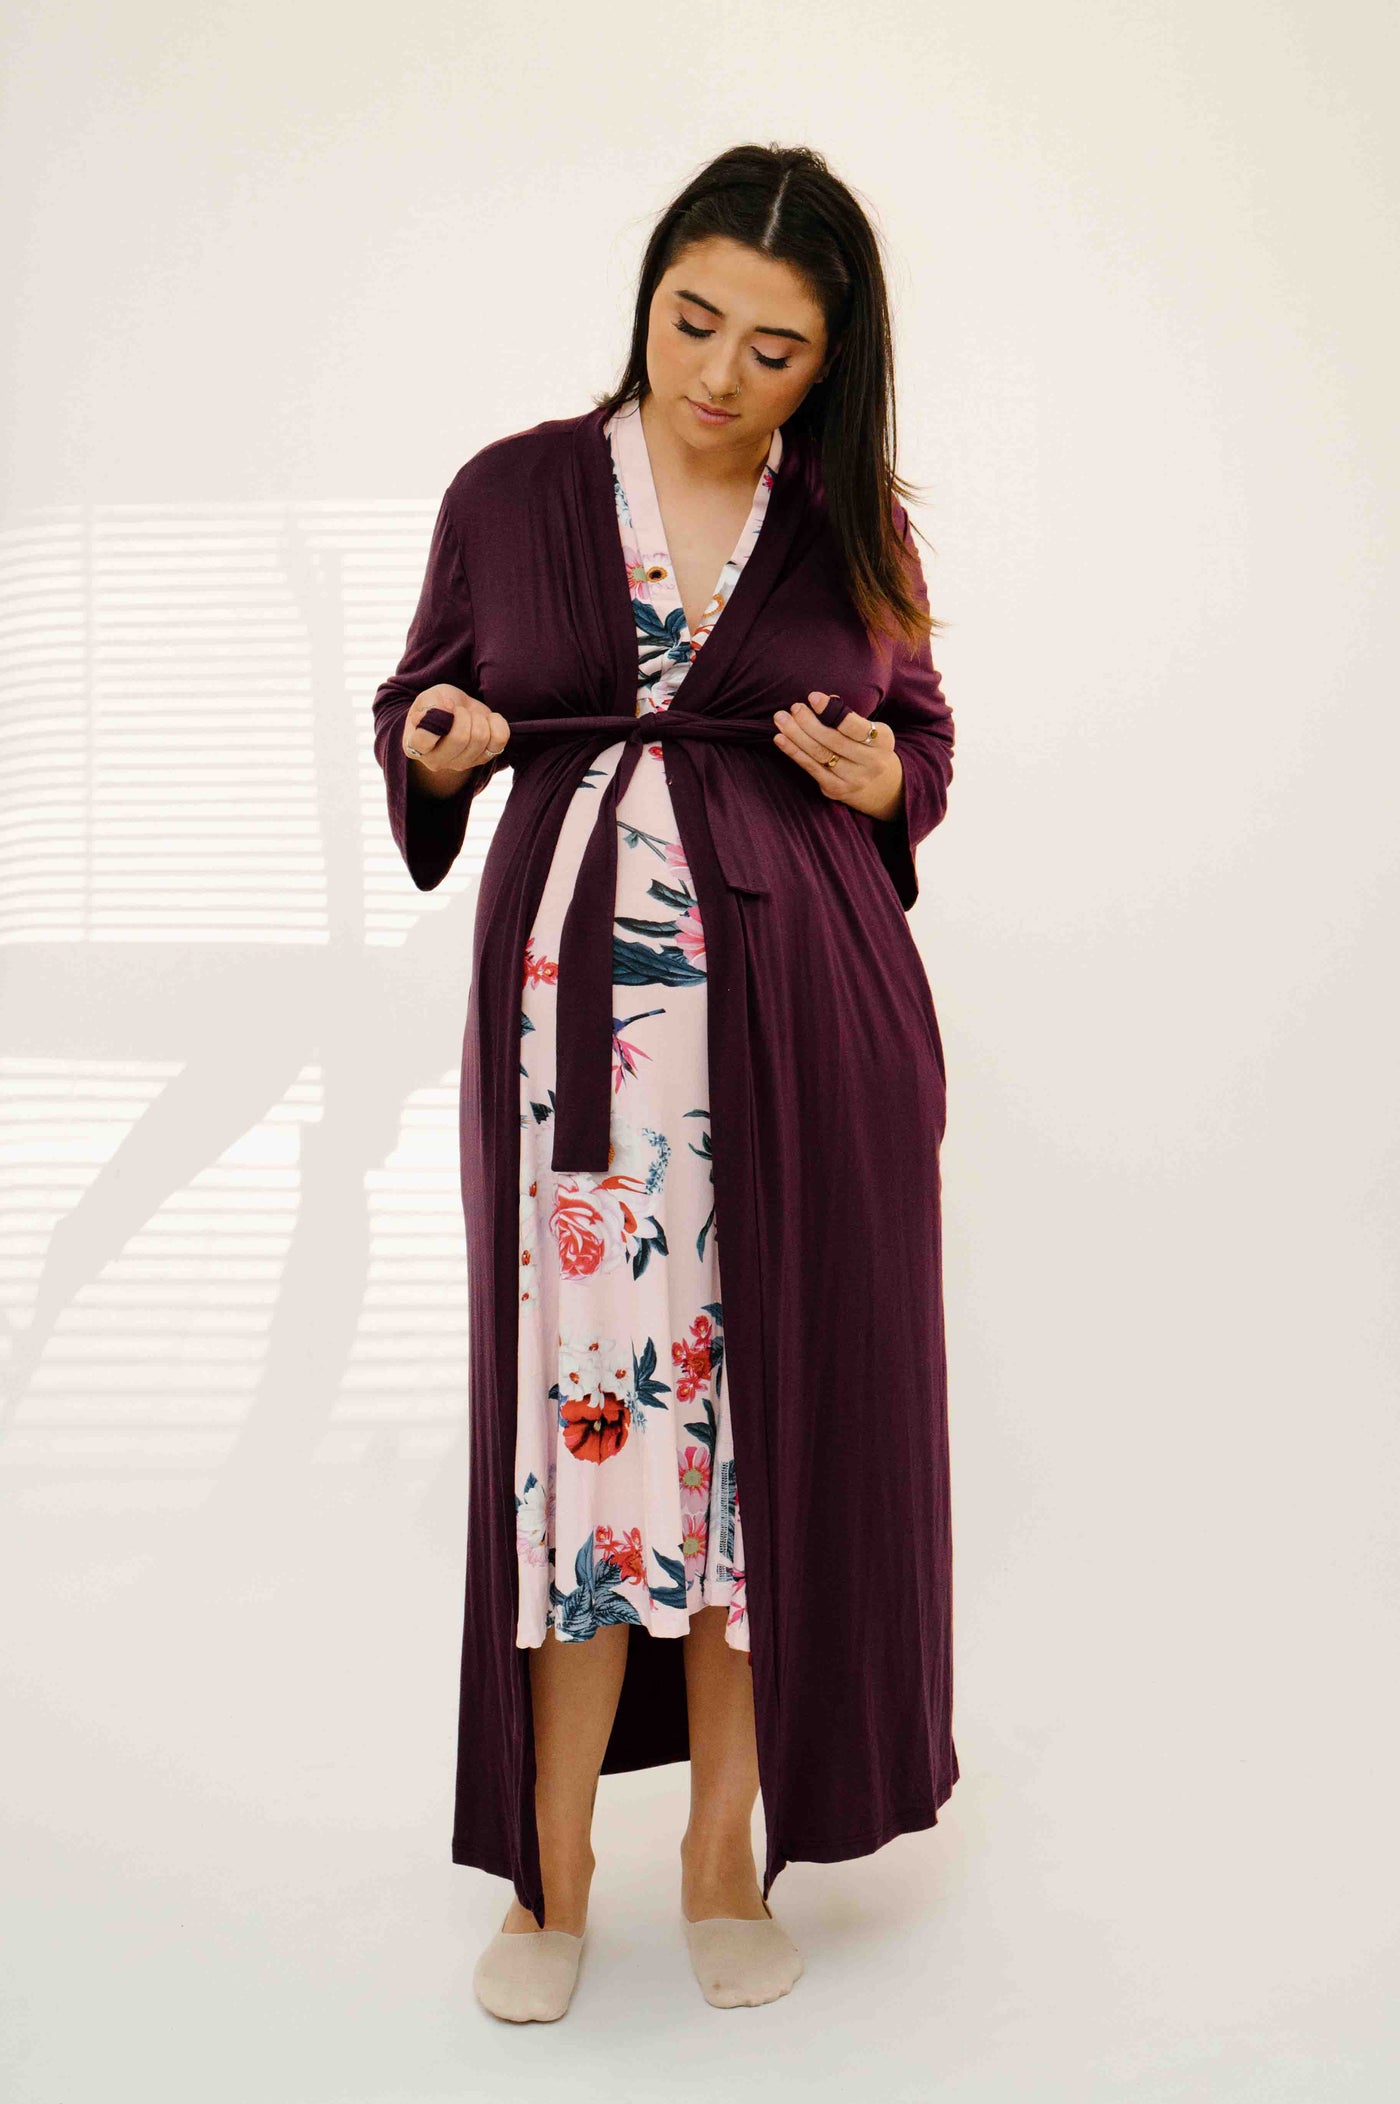 Robes in Plum